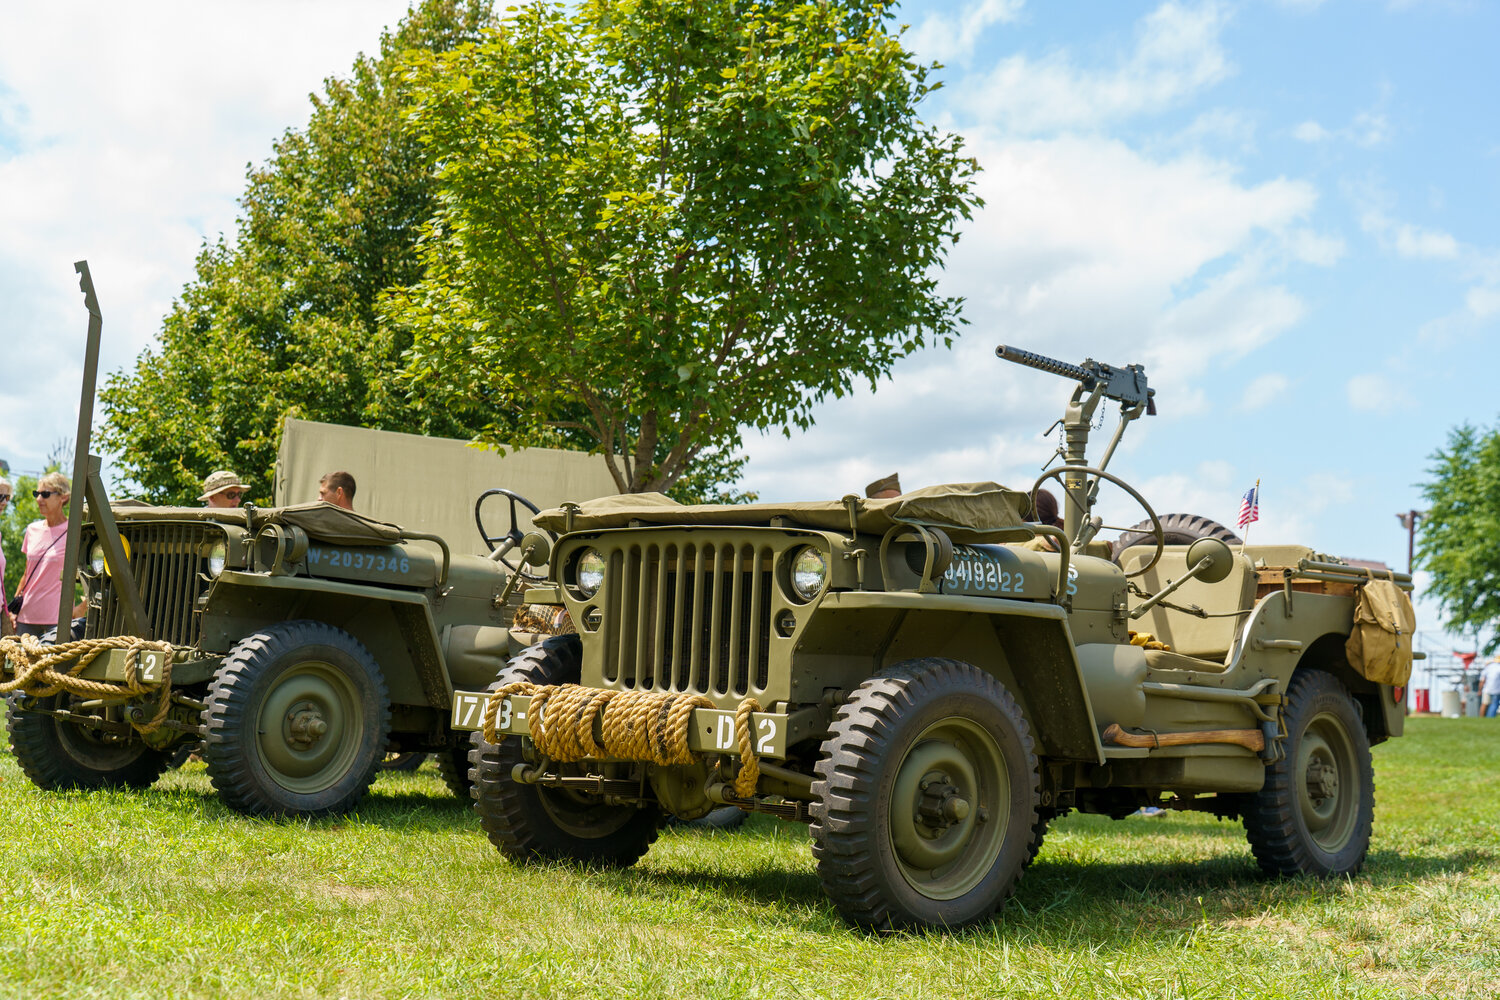 The army jeep is one of the most recognizable vehicles in the history of the US military. These jeeps were known for their versatility while in use.